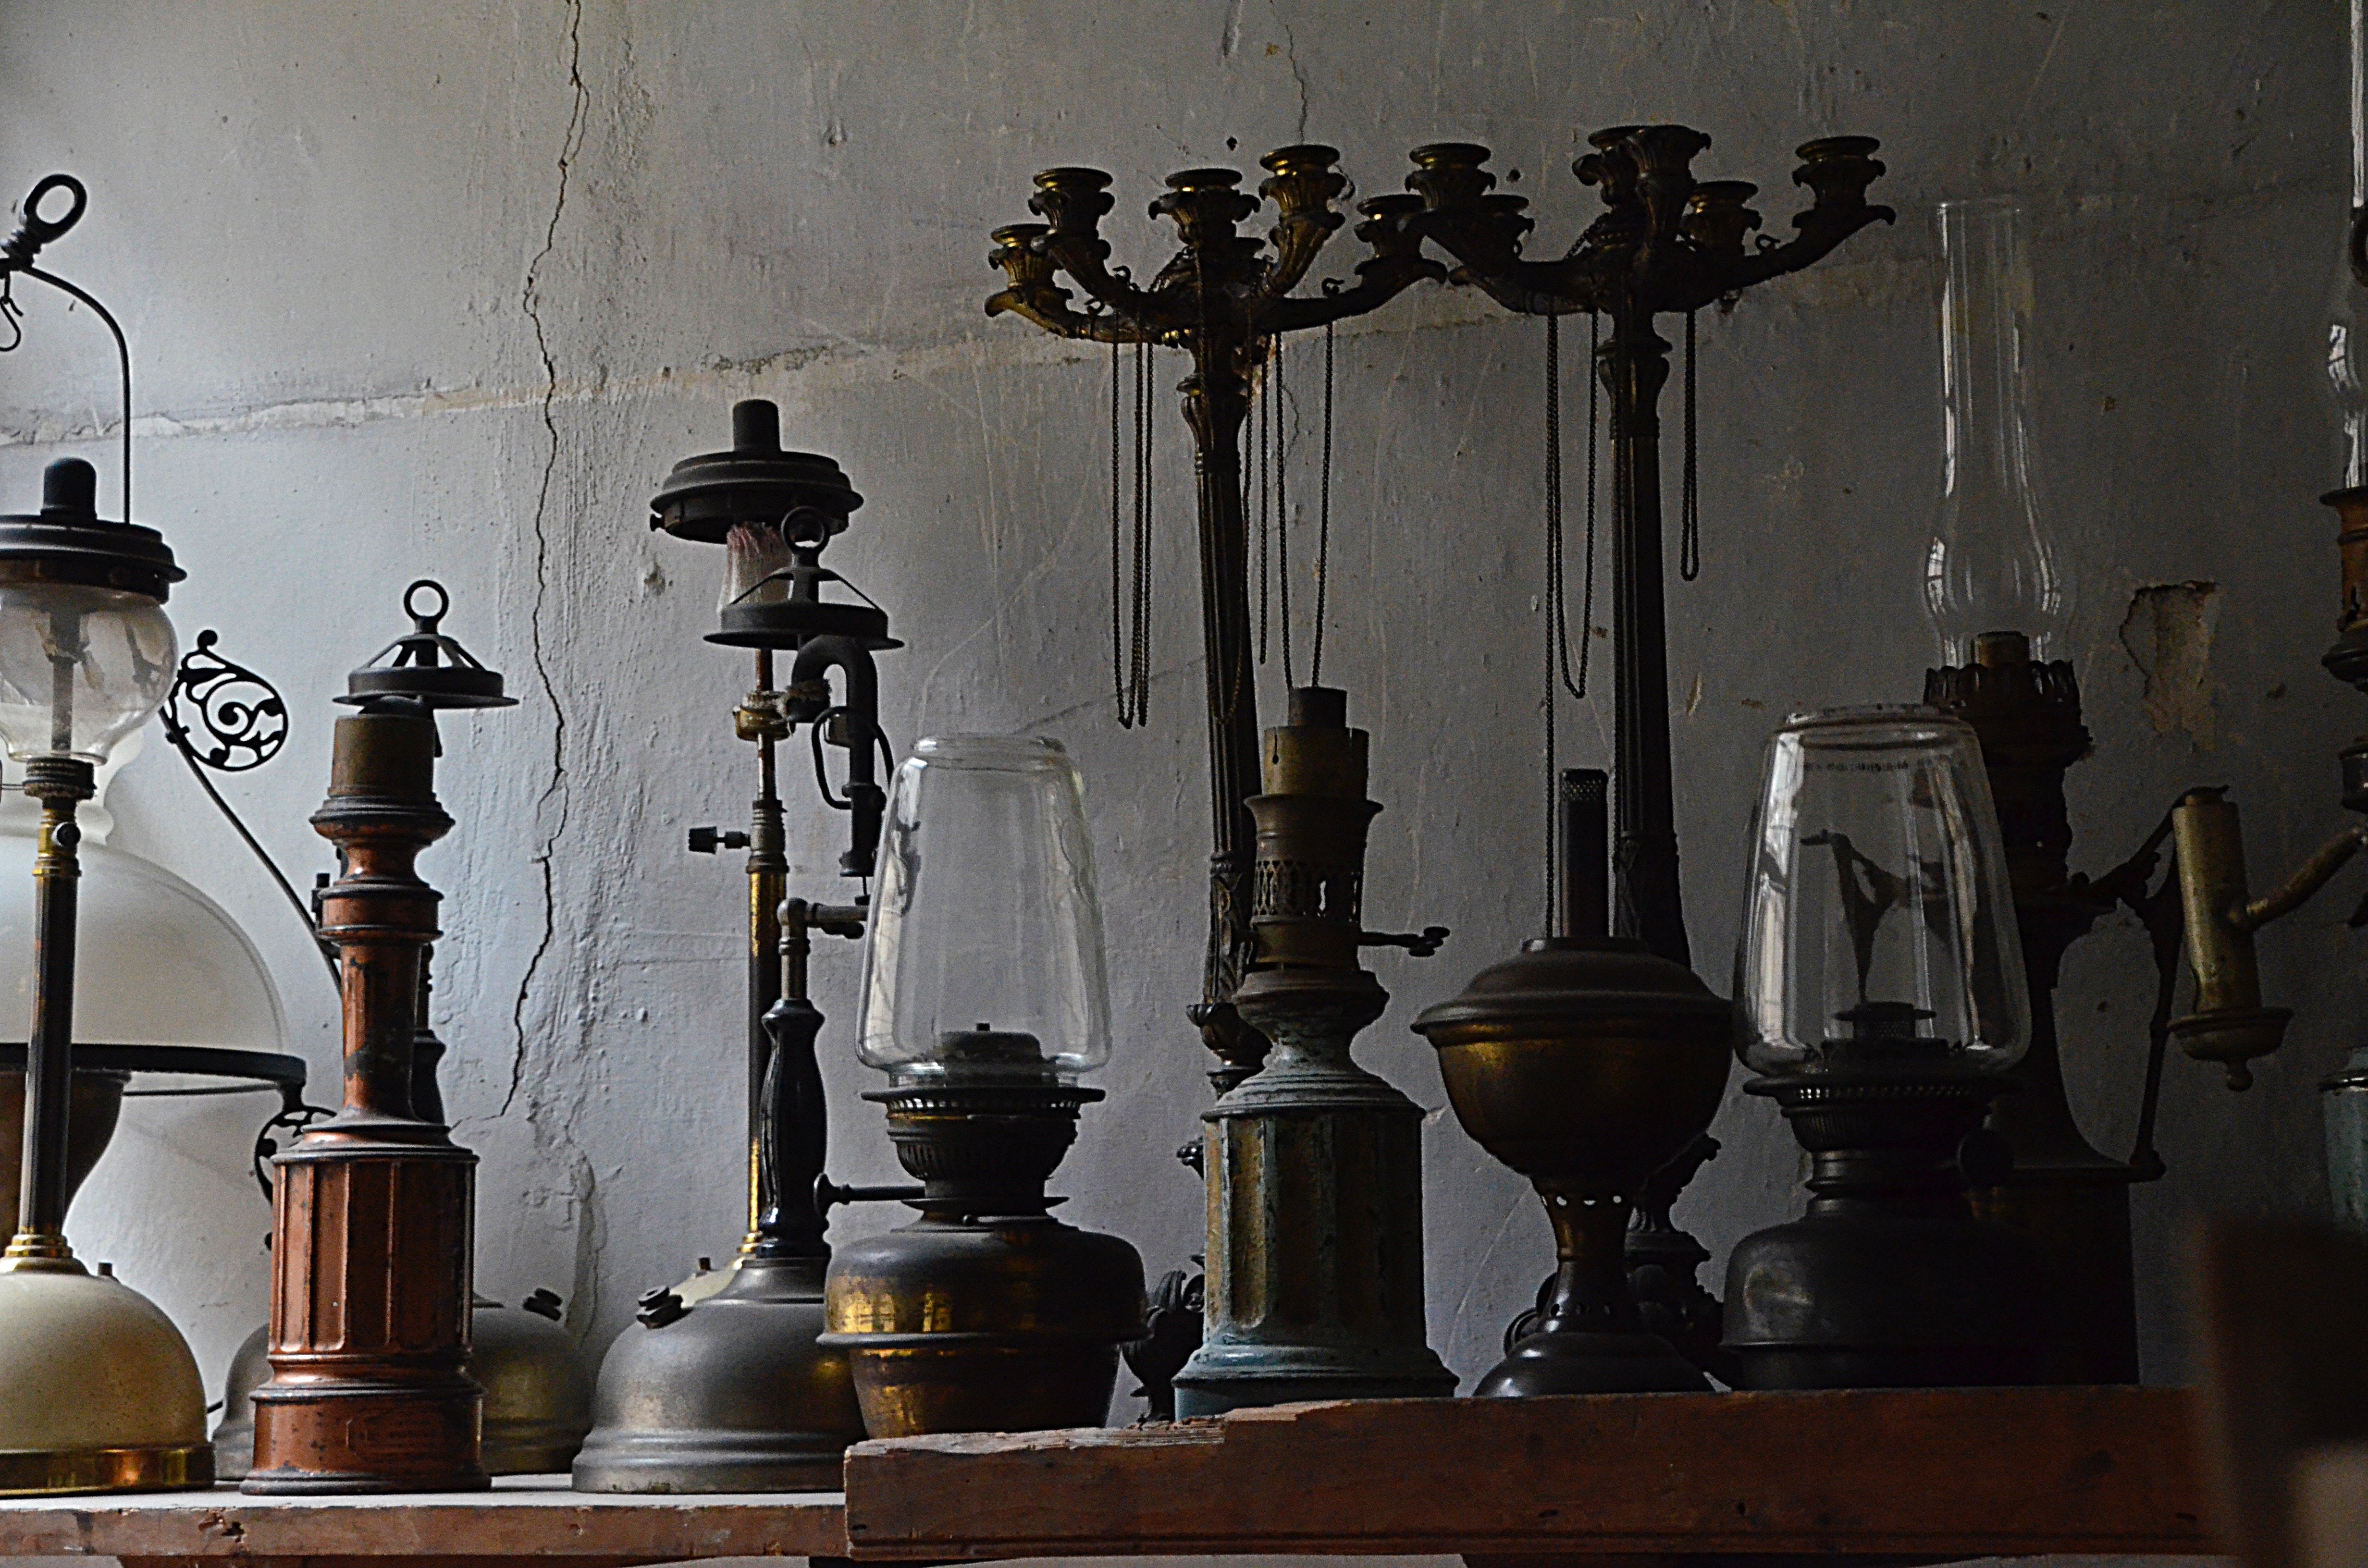 4928x3264 #vintage, #old, #collection, #holder, #antique, #PNG image, #lantern, #lamp, #candle, #wall, #oil, #old lamp, #lighting. Mocah.org HD Wallpaper